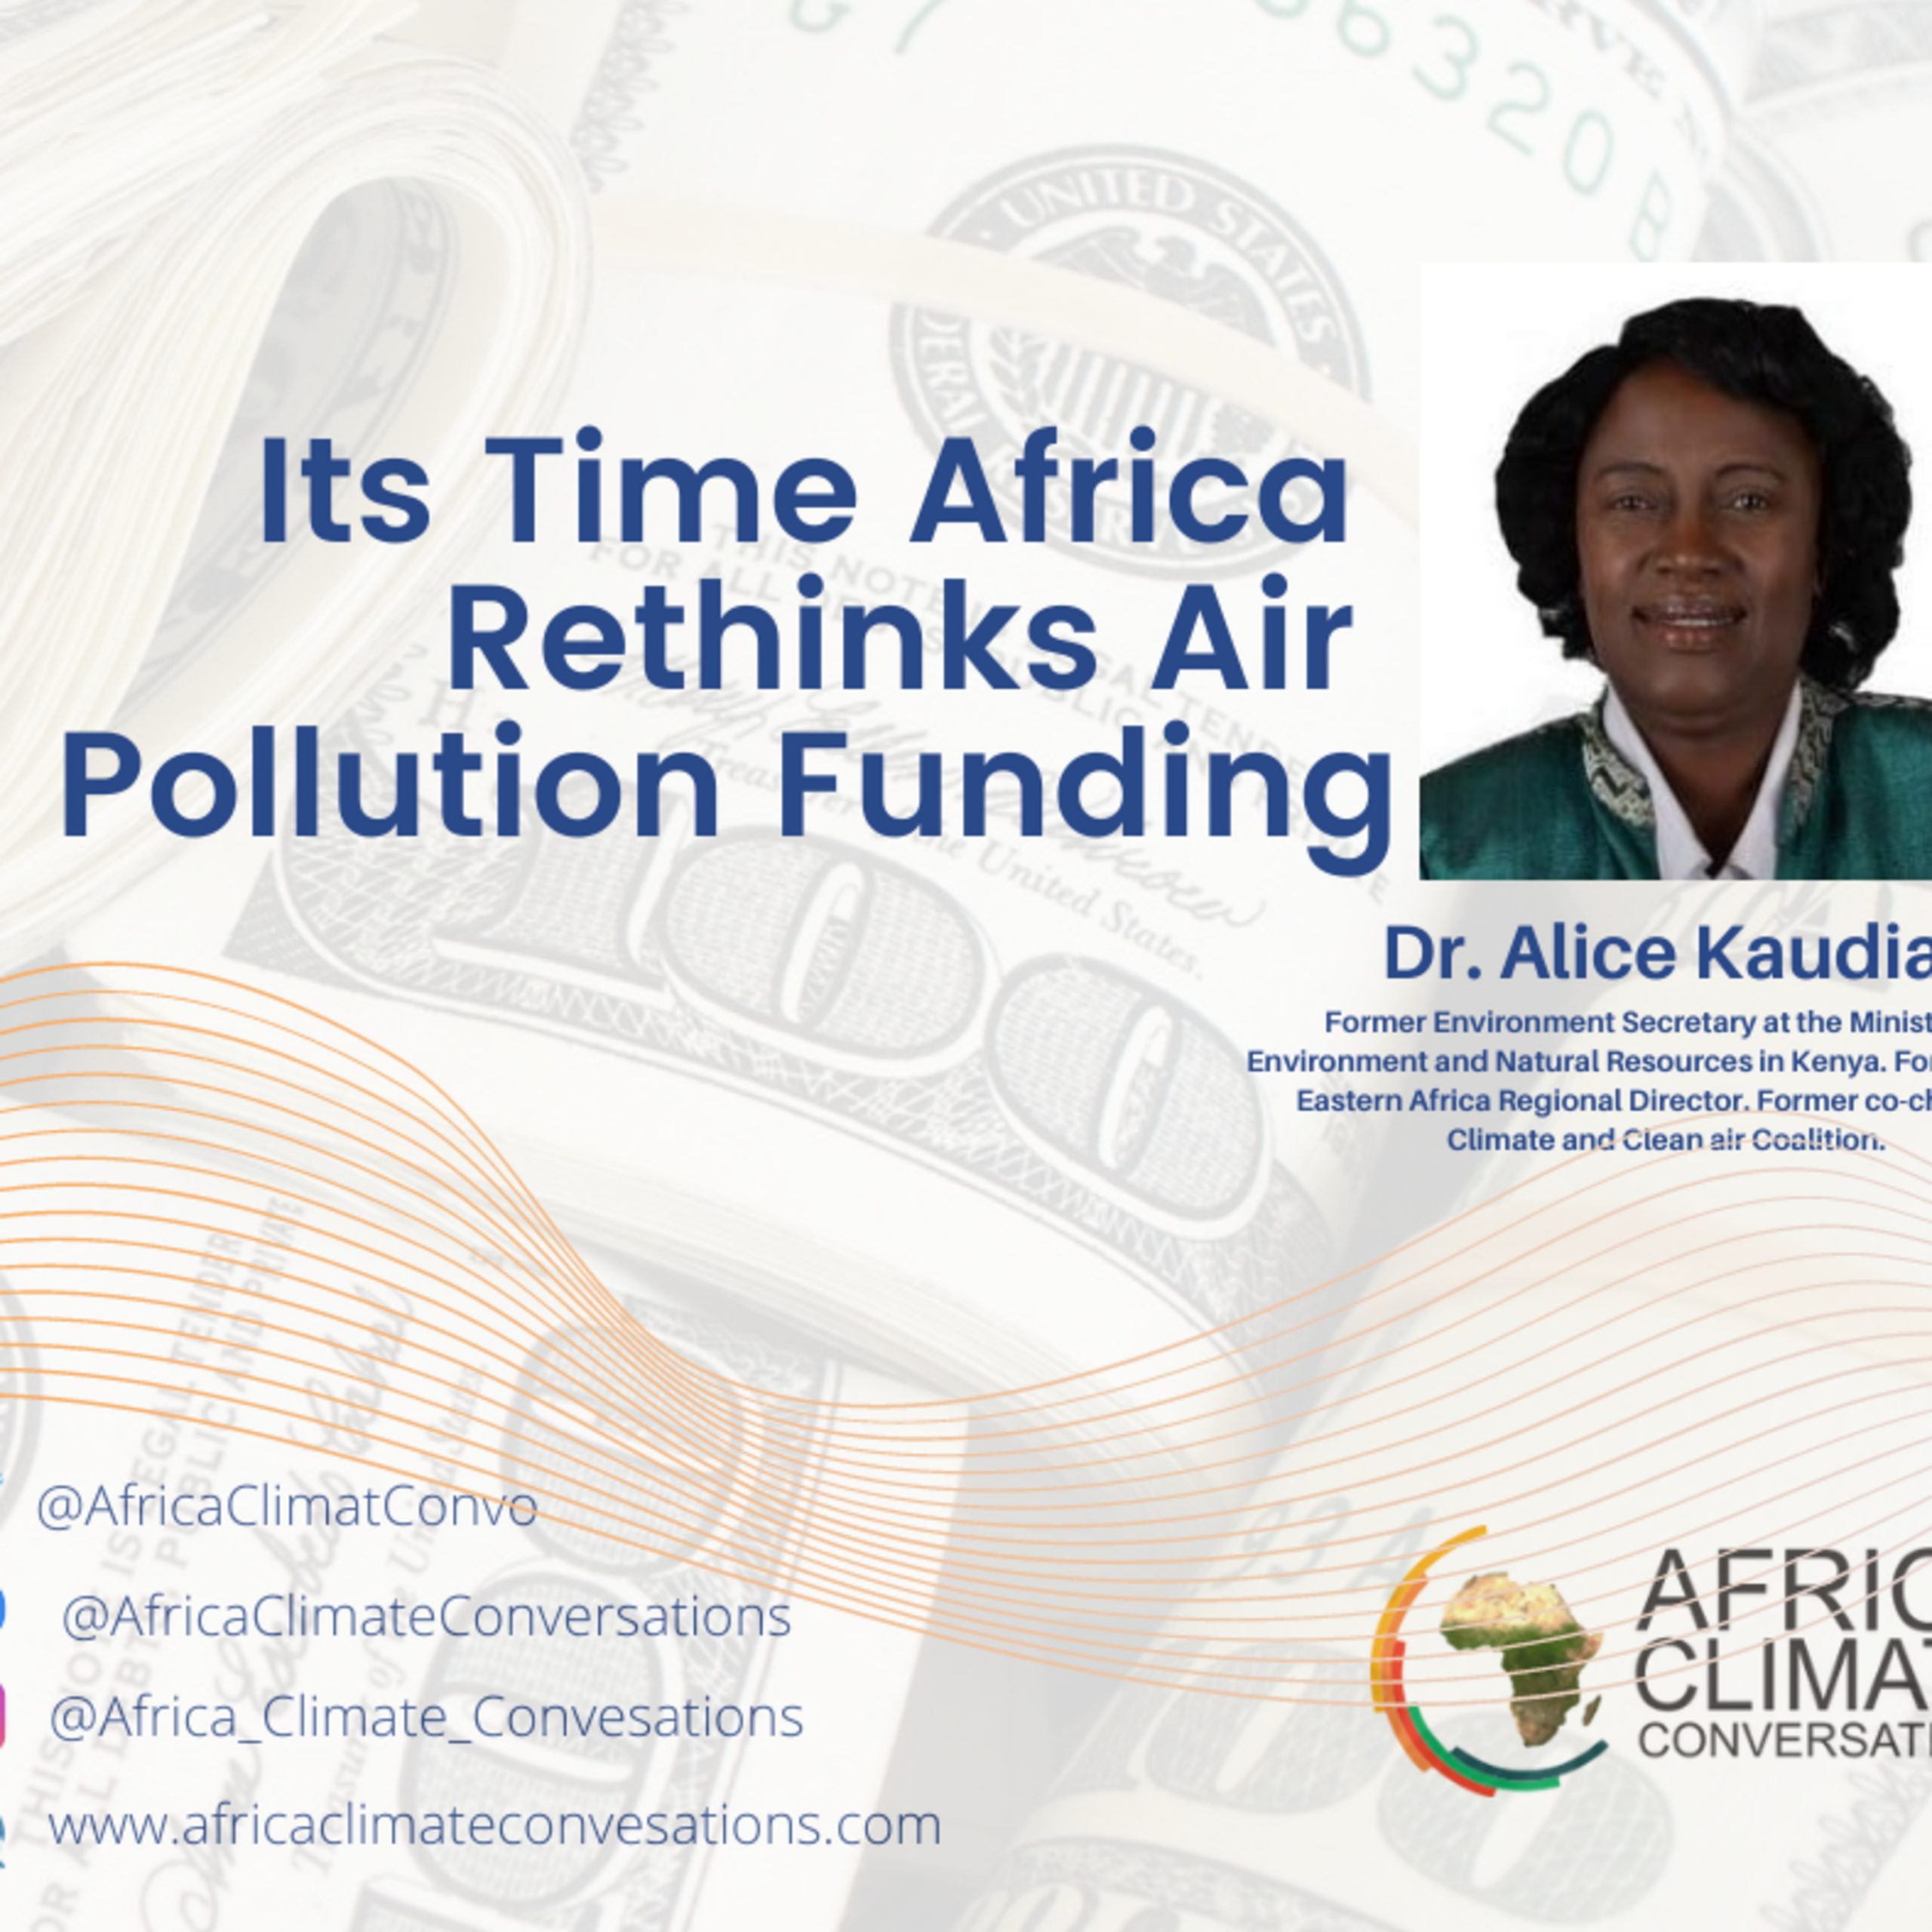 It is time Africa rethinks air pollution funding.